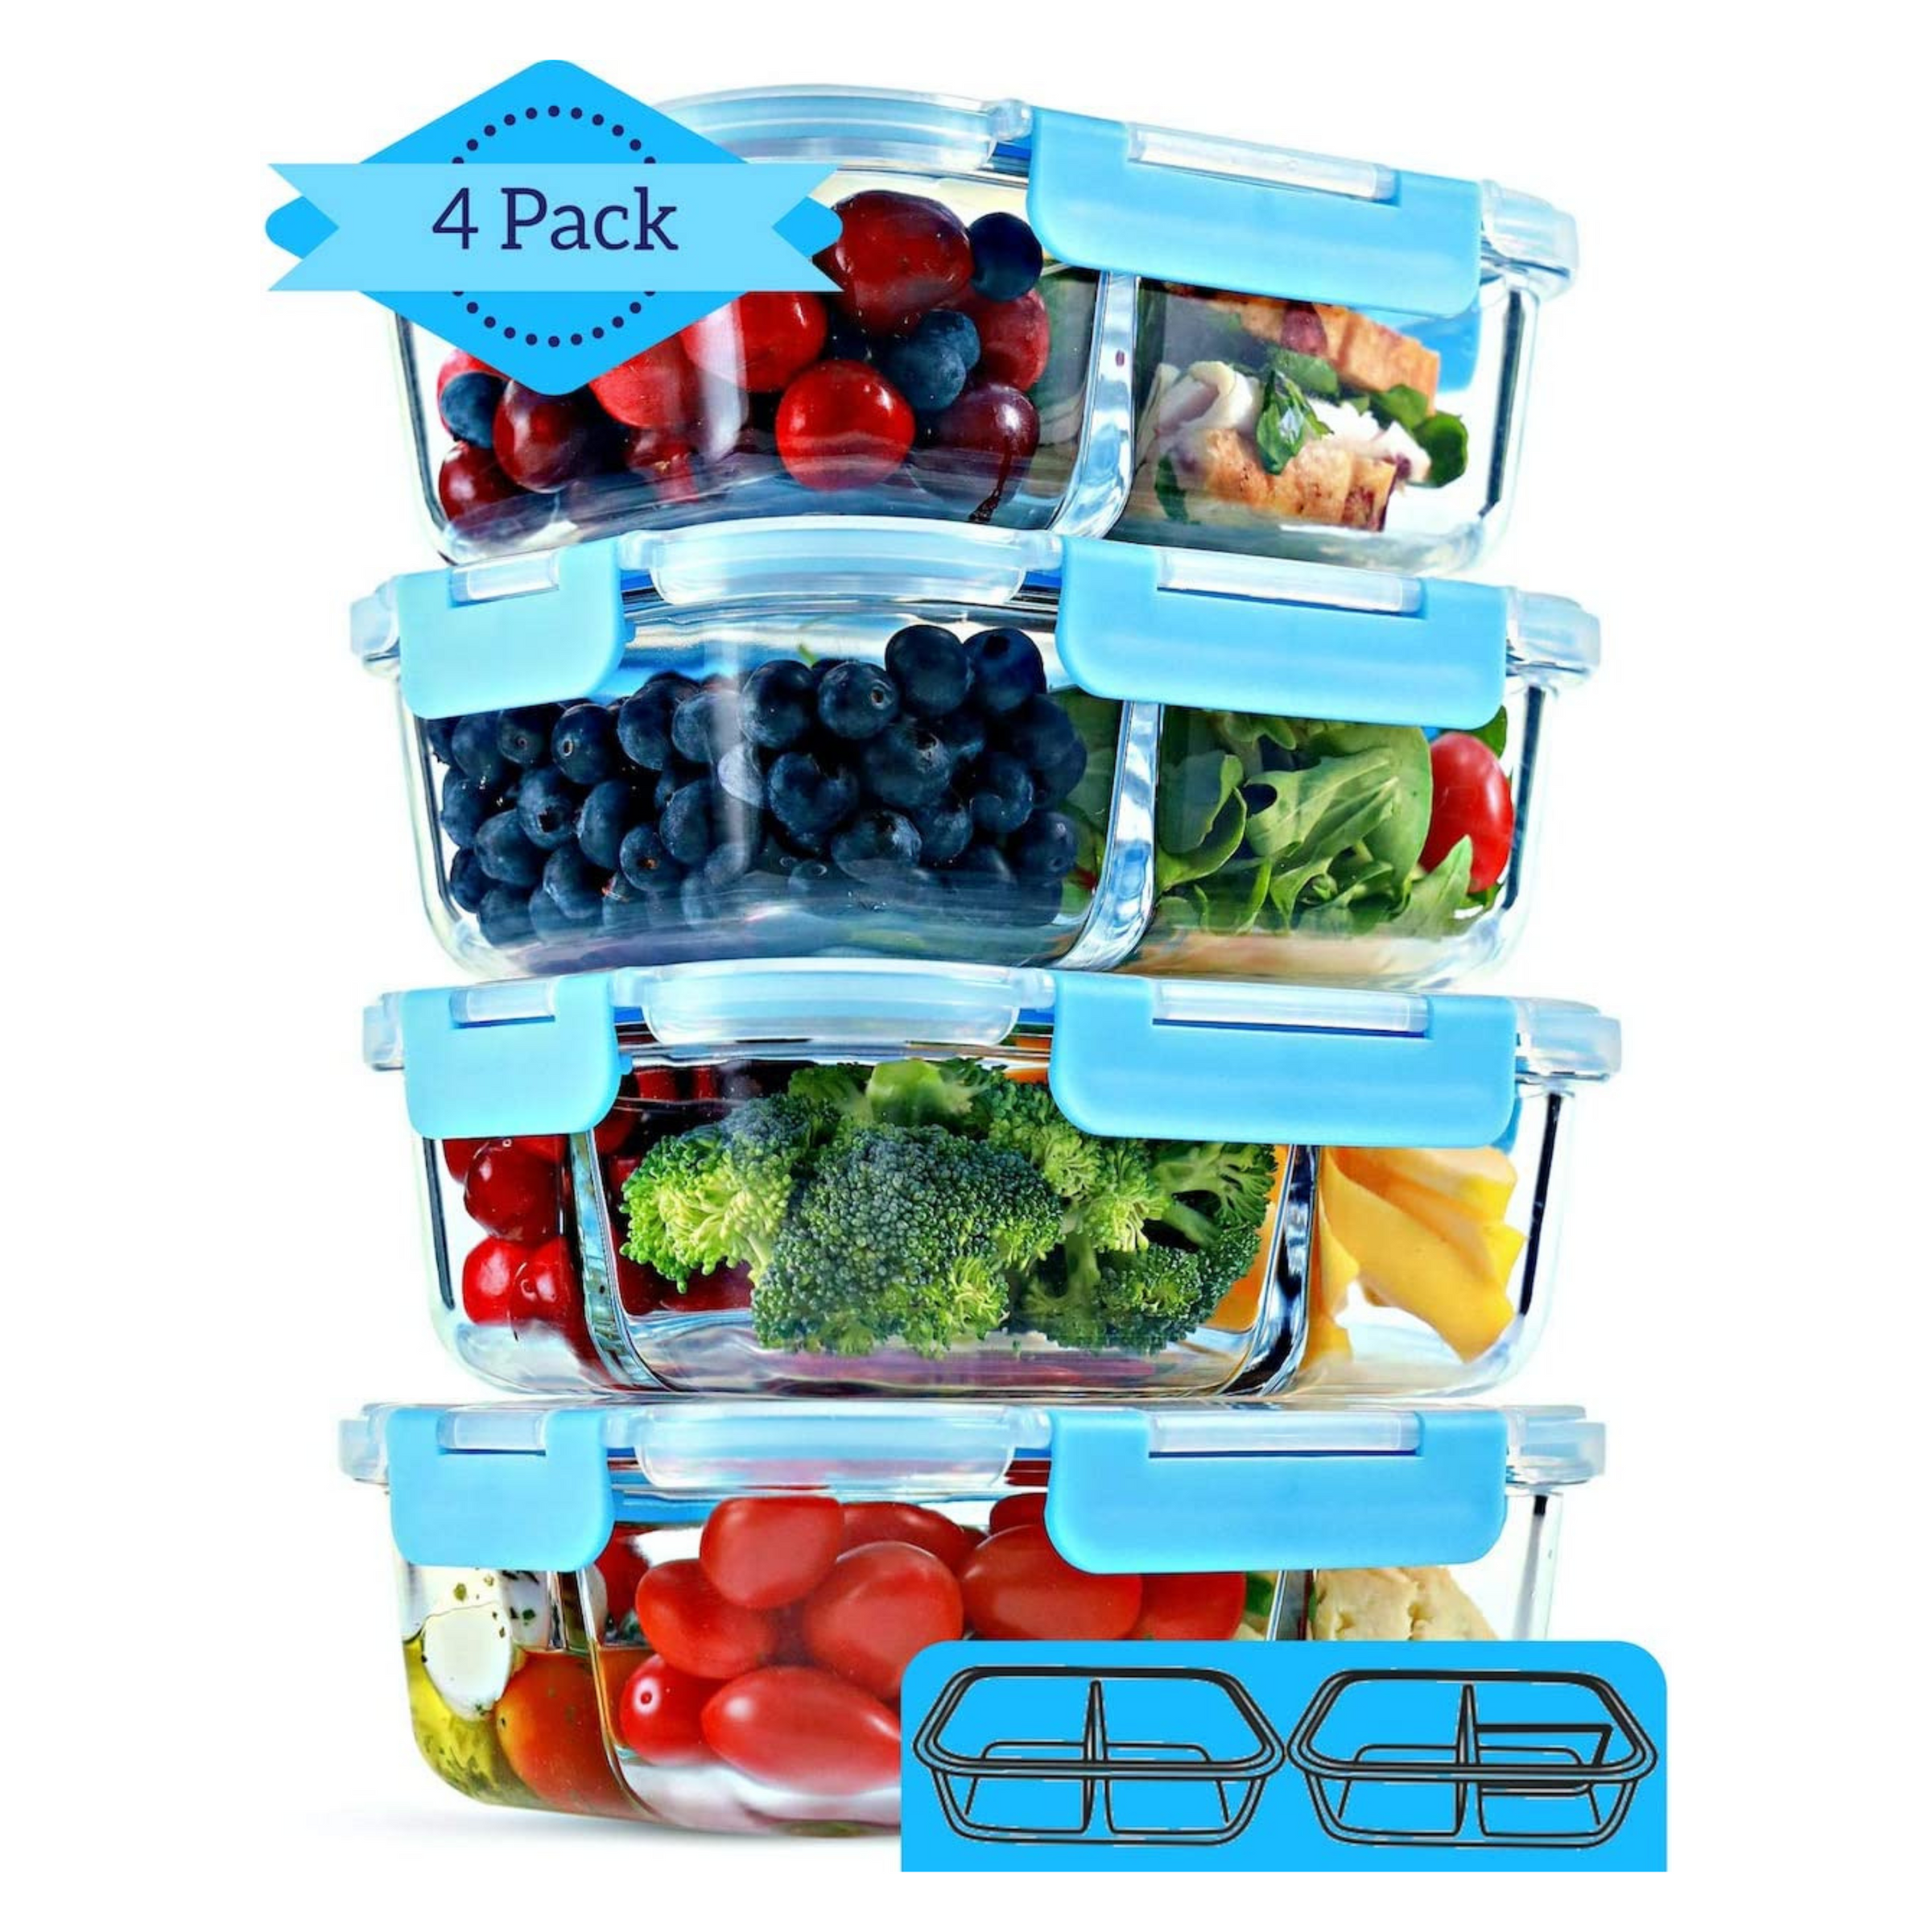 3 Pcs] Glass Meal Prep Containers Glass 2 Compartment - Glass Food